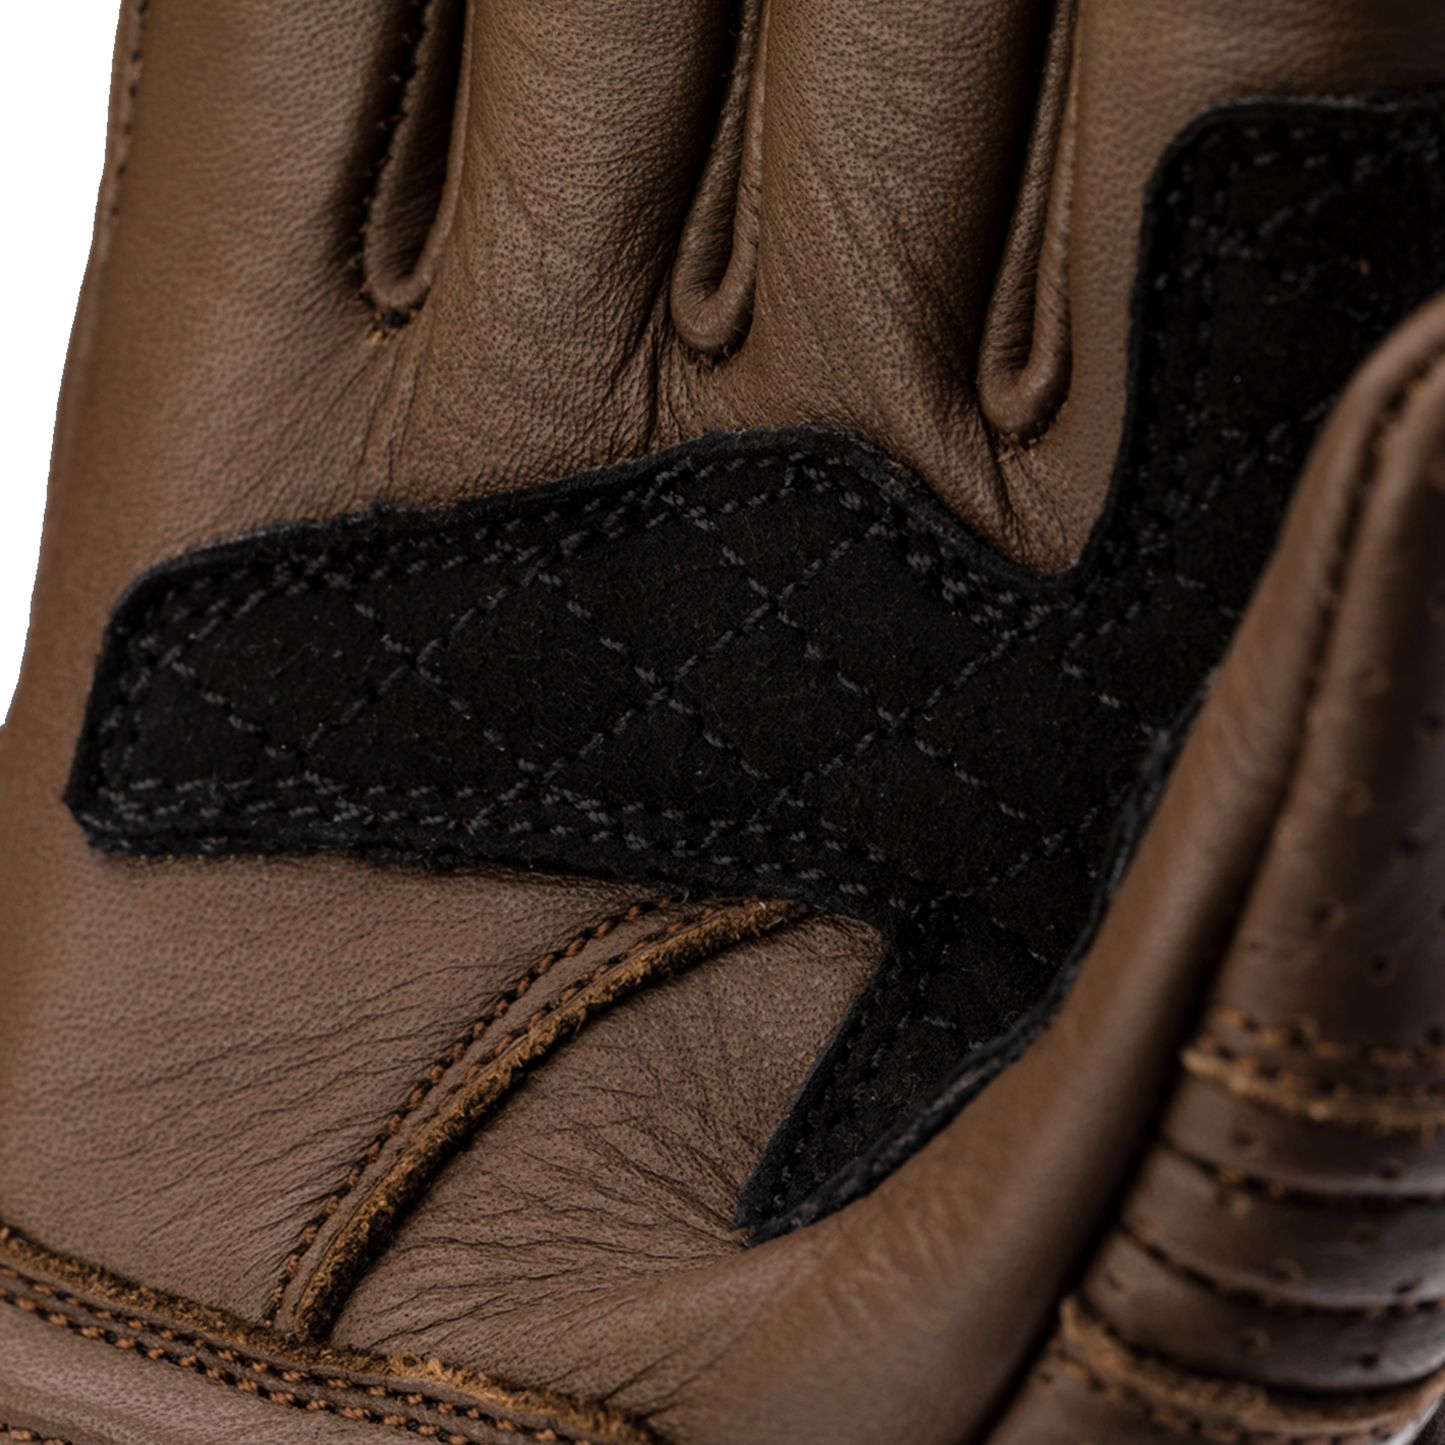 RST Roadster 3 Men's Riding Gloves - CE APPROVED - Brown